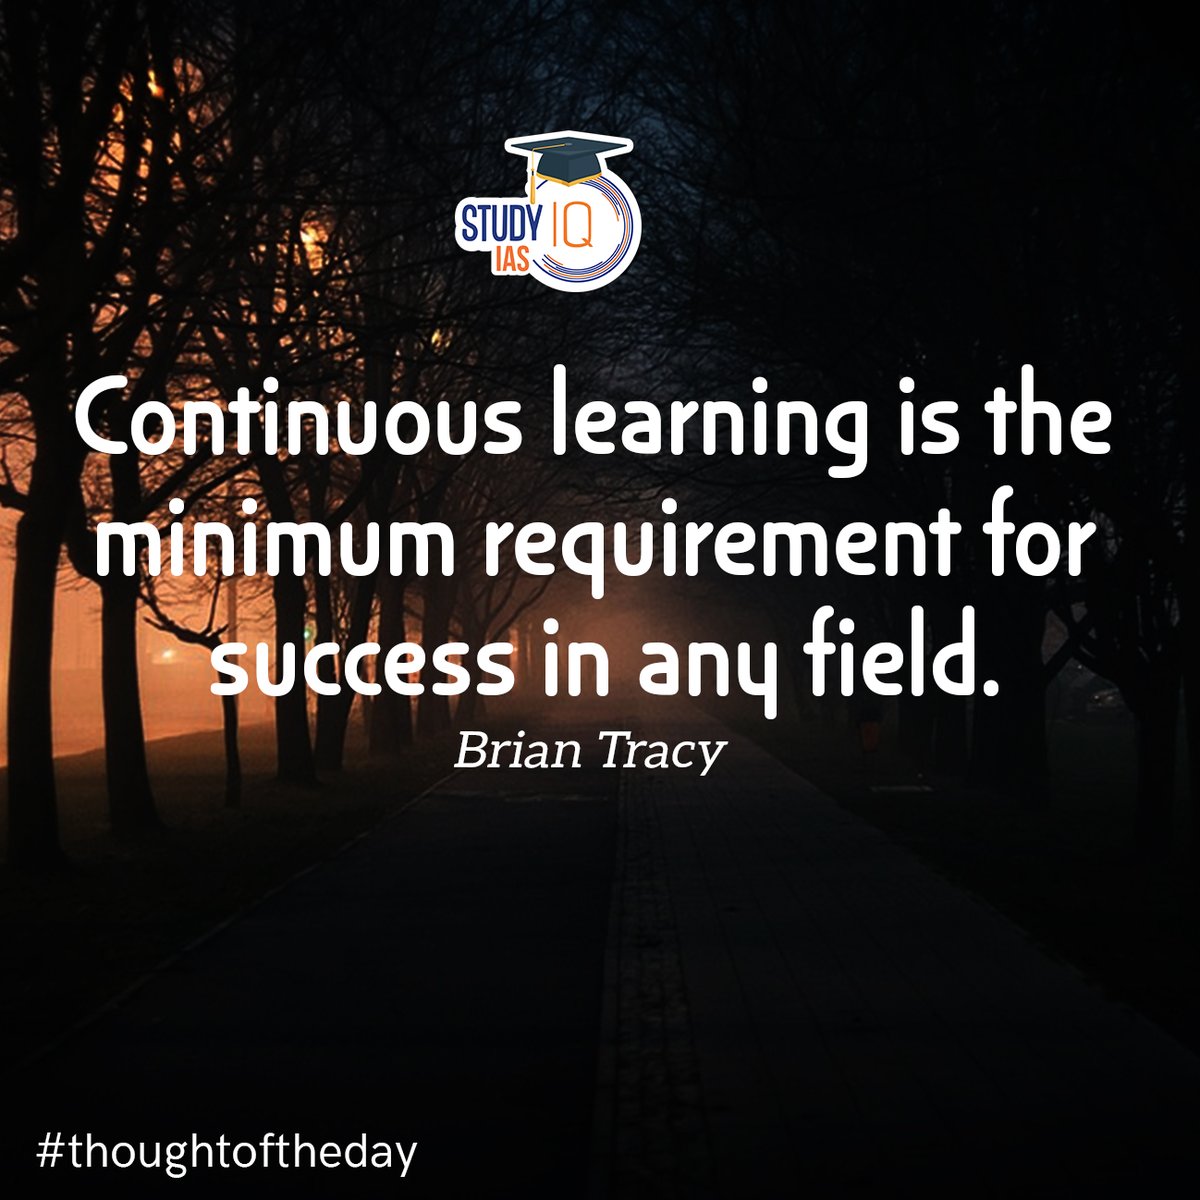 #continuouslearning #success #successinanyfield #briantracy #thoughtoftheday #Motivationalquote #dailymotivation #quotes #quoteoftheday #todaythought #quotesaboutlife #quoteofthelife #dailyquotes #dailythoughts #motivationquotes